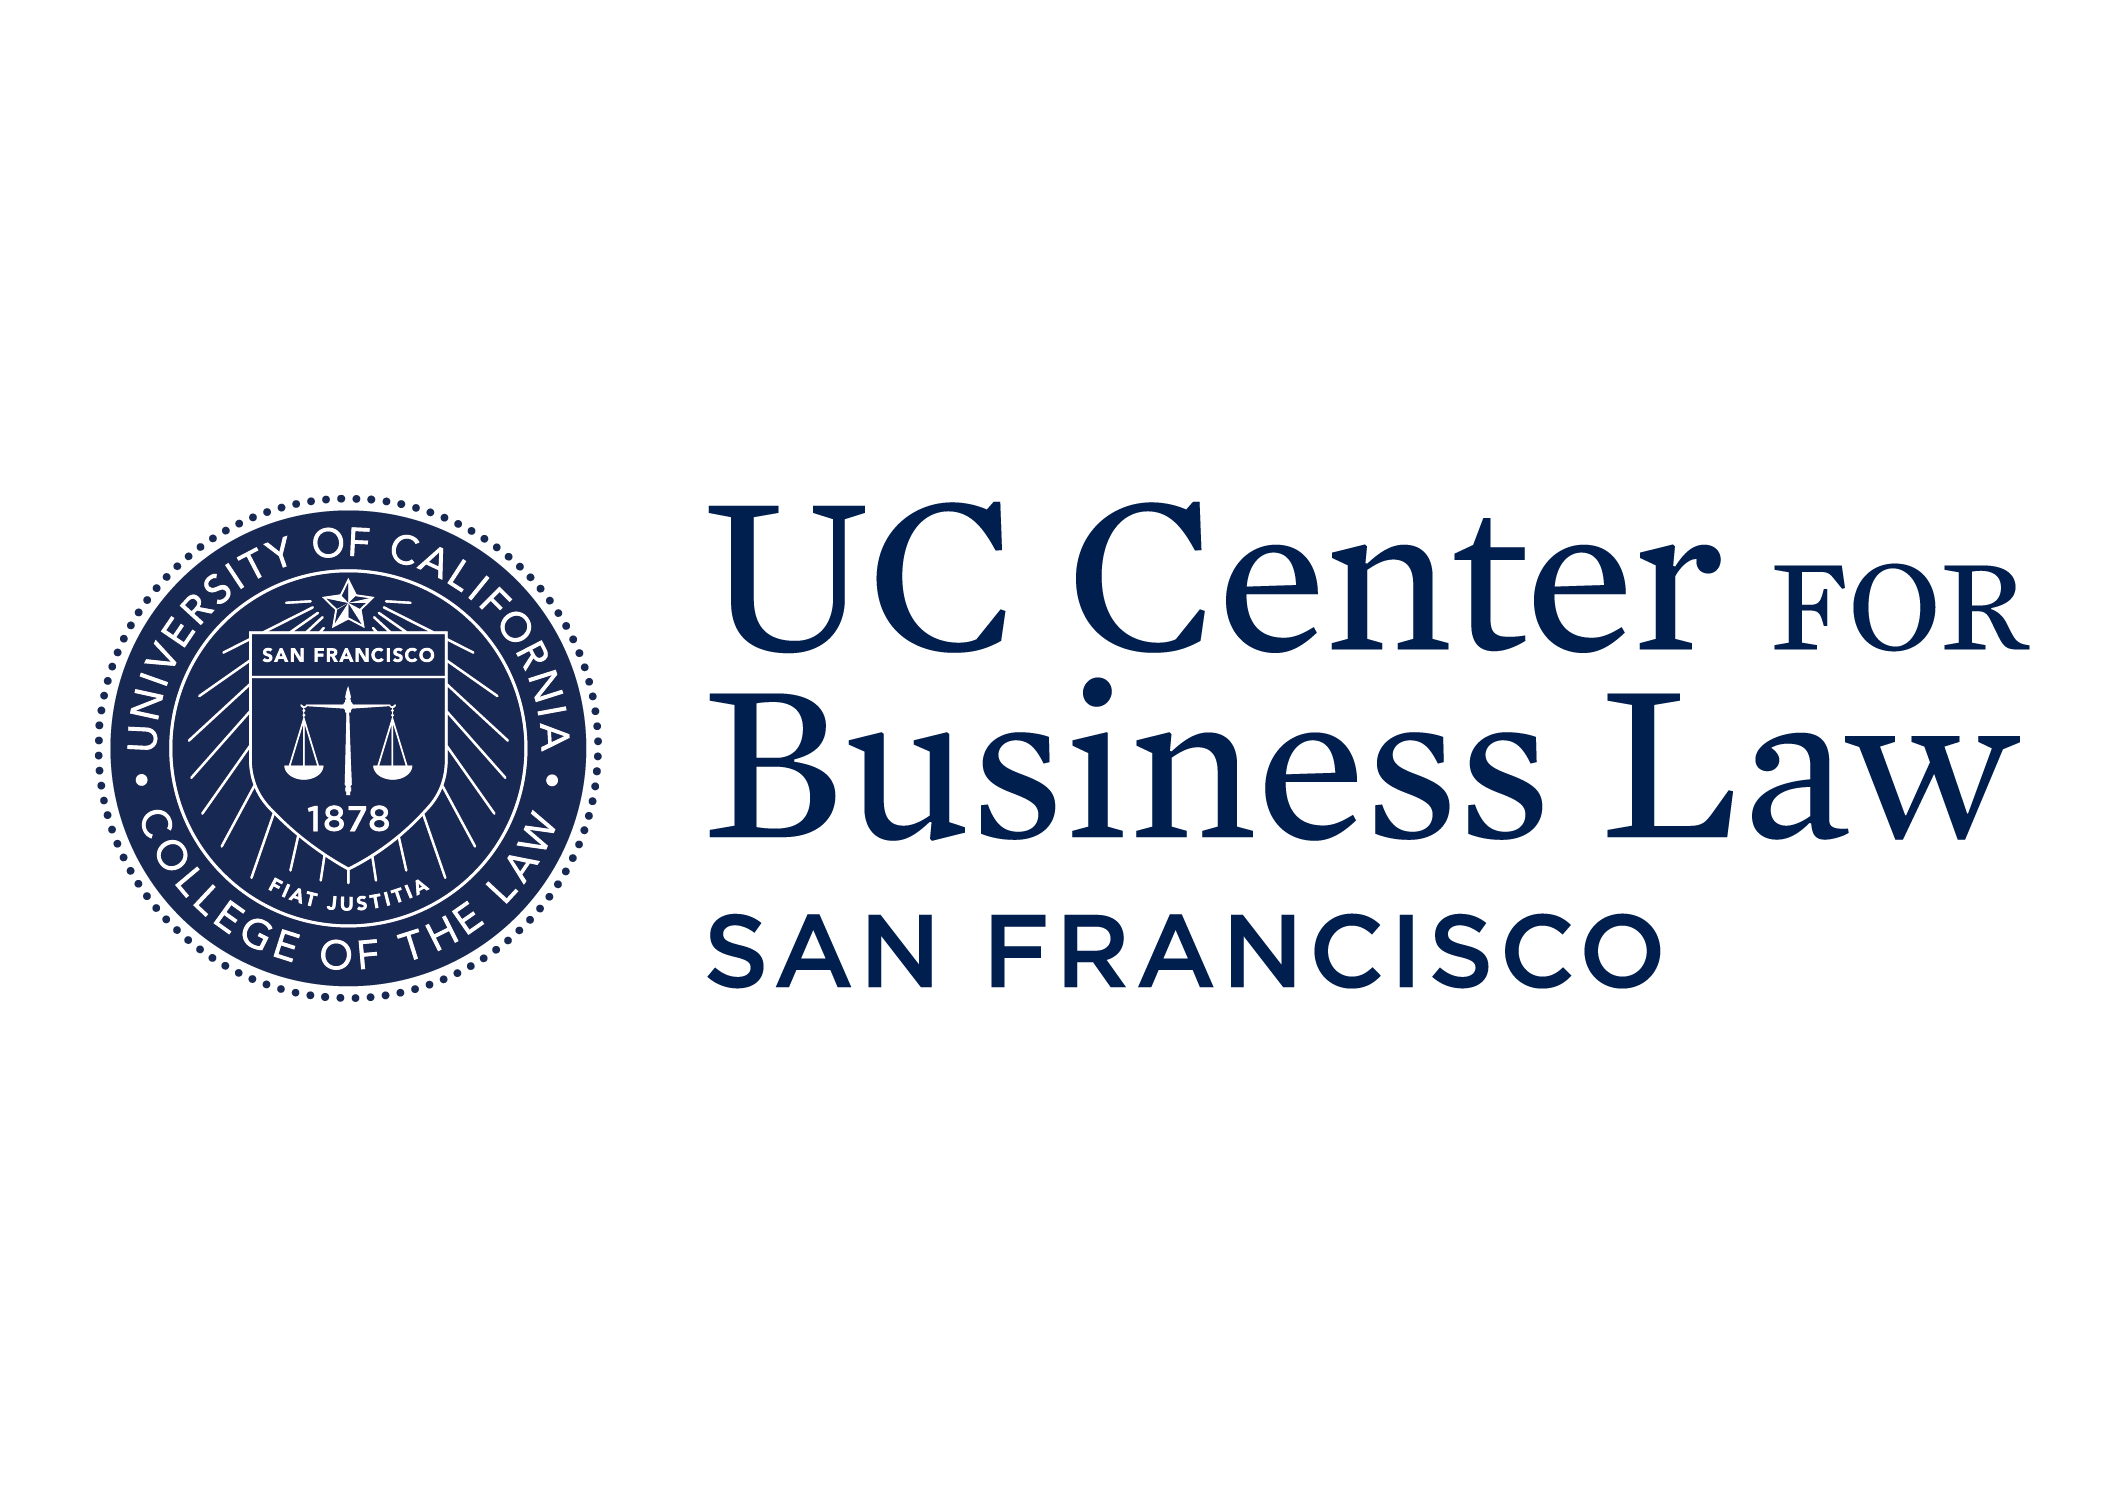 UC Center for Business Law